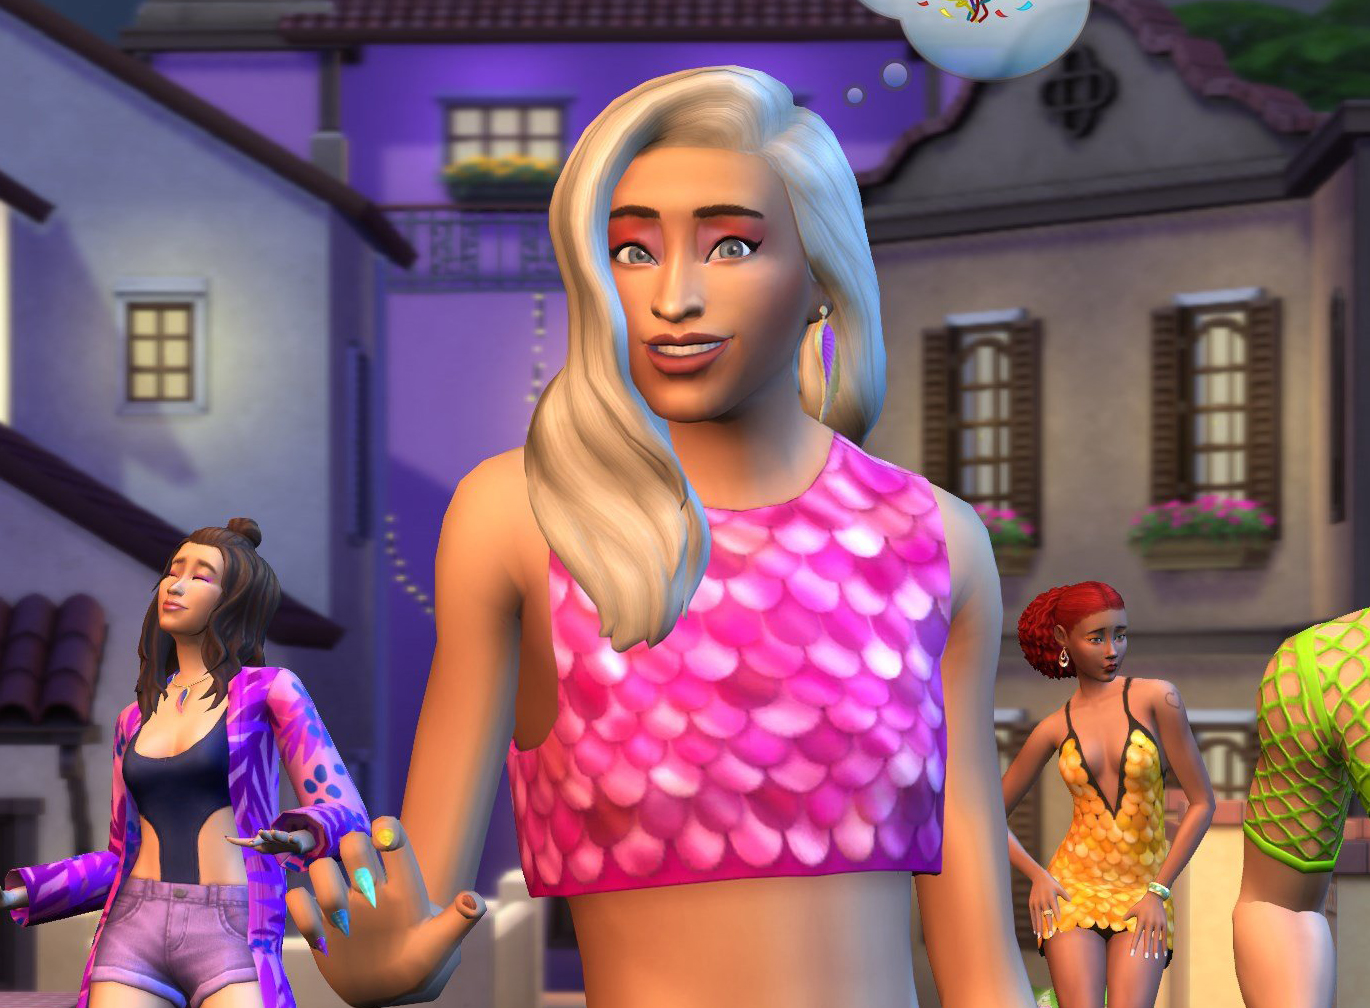 Grof richting Ezel The Sims 4 To Feature New Brazilian Music Soon | SimsVIP